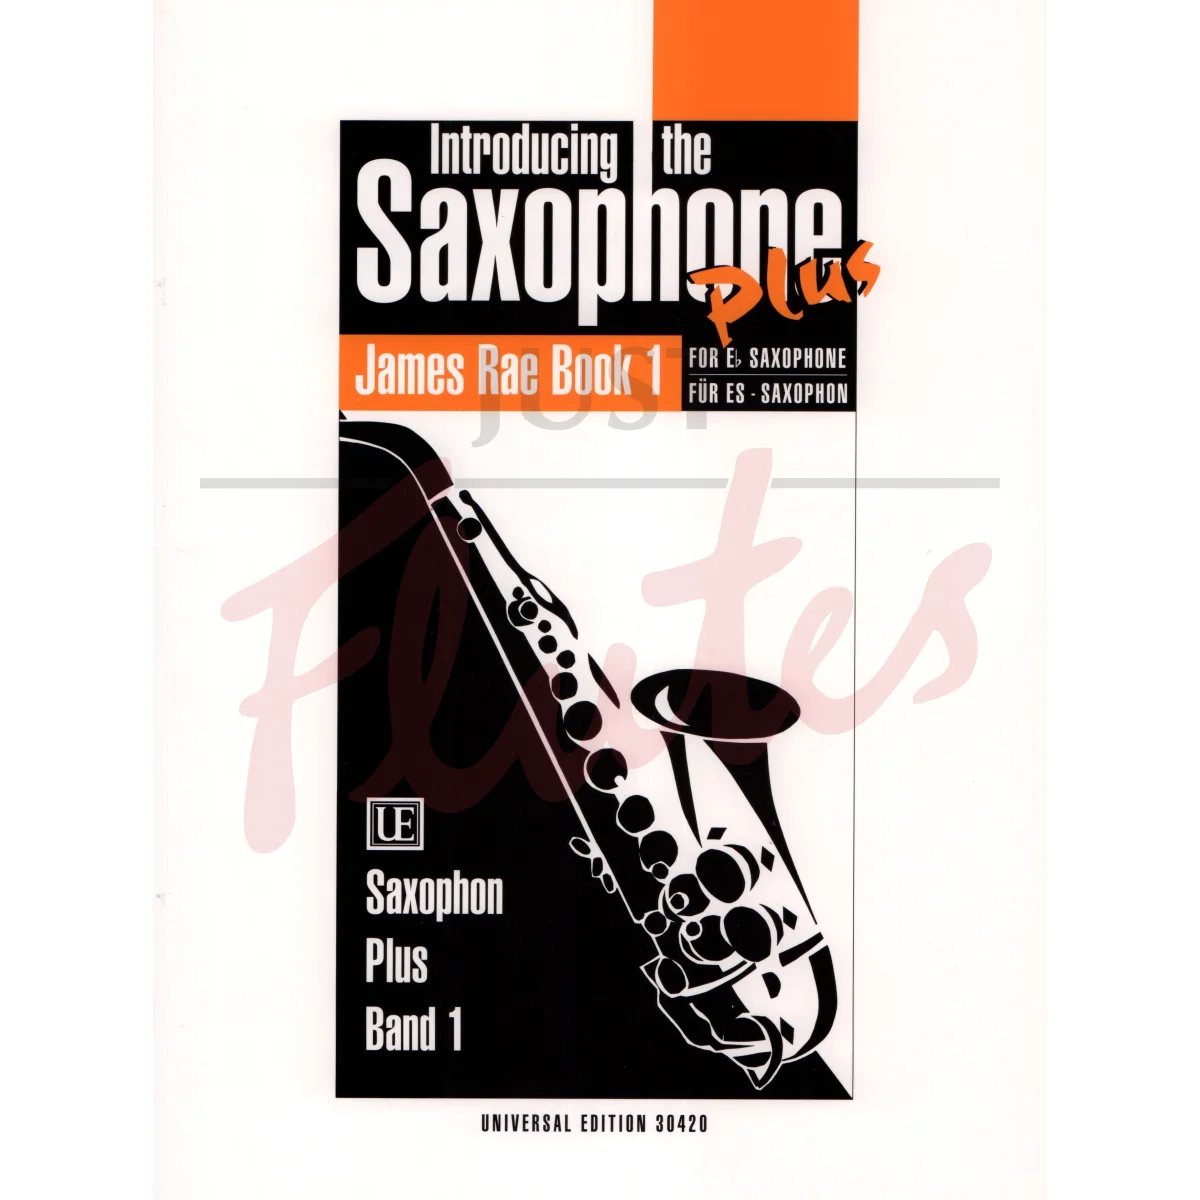 Introducing the Saxophone Plus Book 1